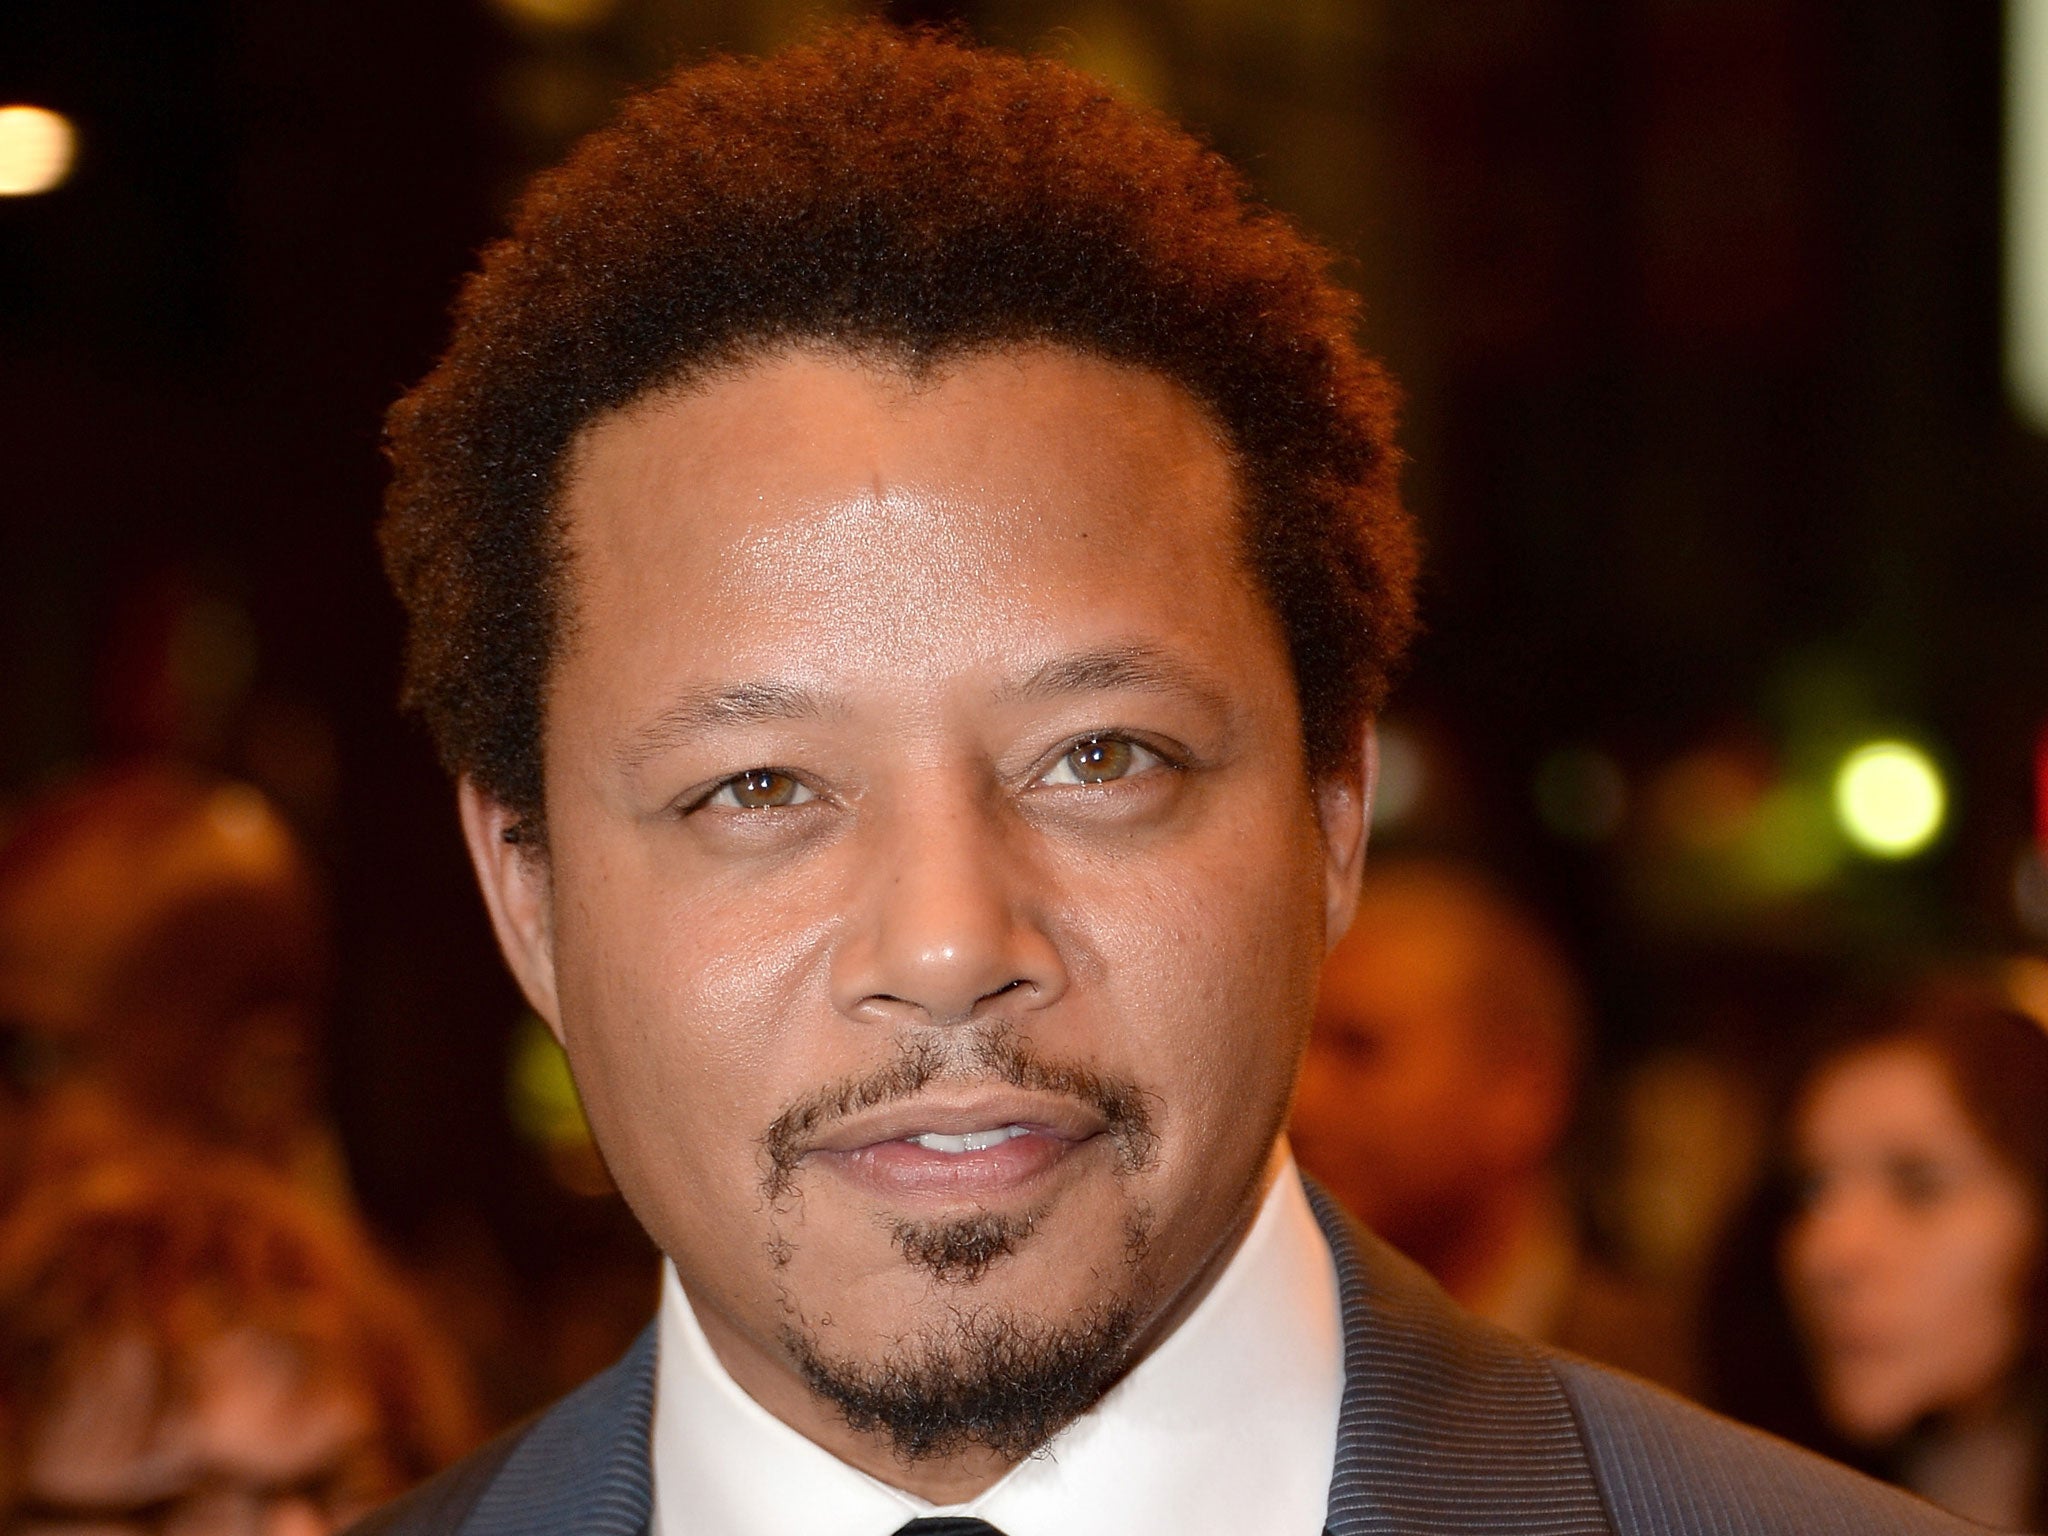 Actor Terrence Howard said: 'If [women] are using dry paper, they aren't washing all of themselves. It's just unclean' (Getty)